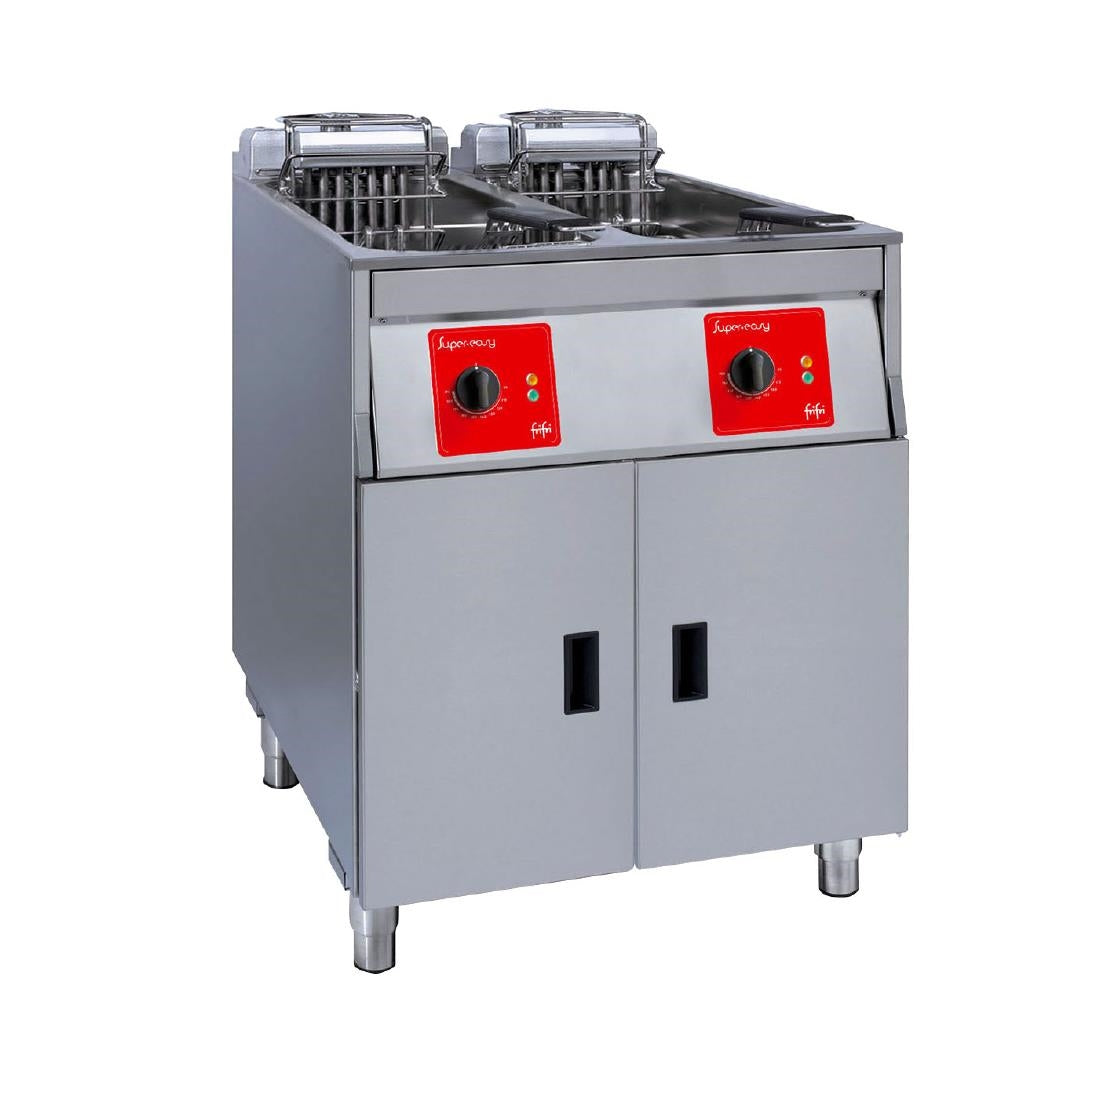 HS070-3PH FriFri Super Easy 622 Electric Free-standing Fryer Twin Tank Twin Baskets with Filtration 2x15kW Three Phase SL622H32G0